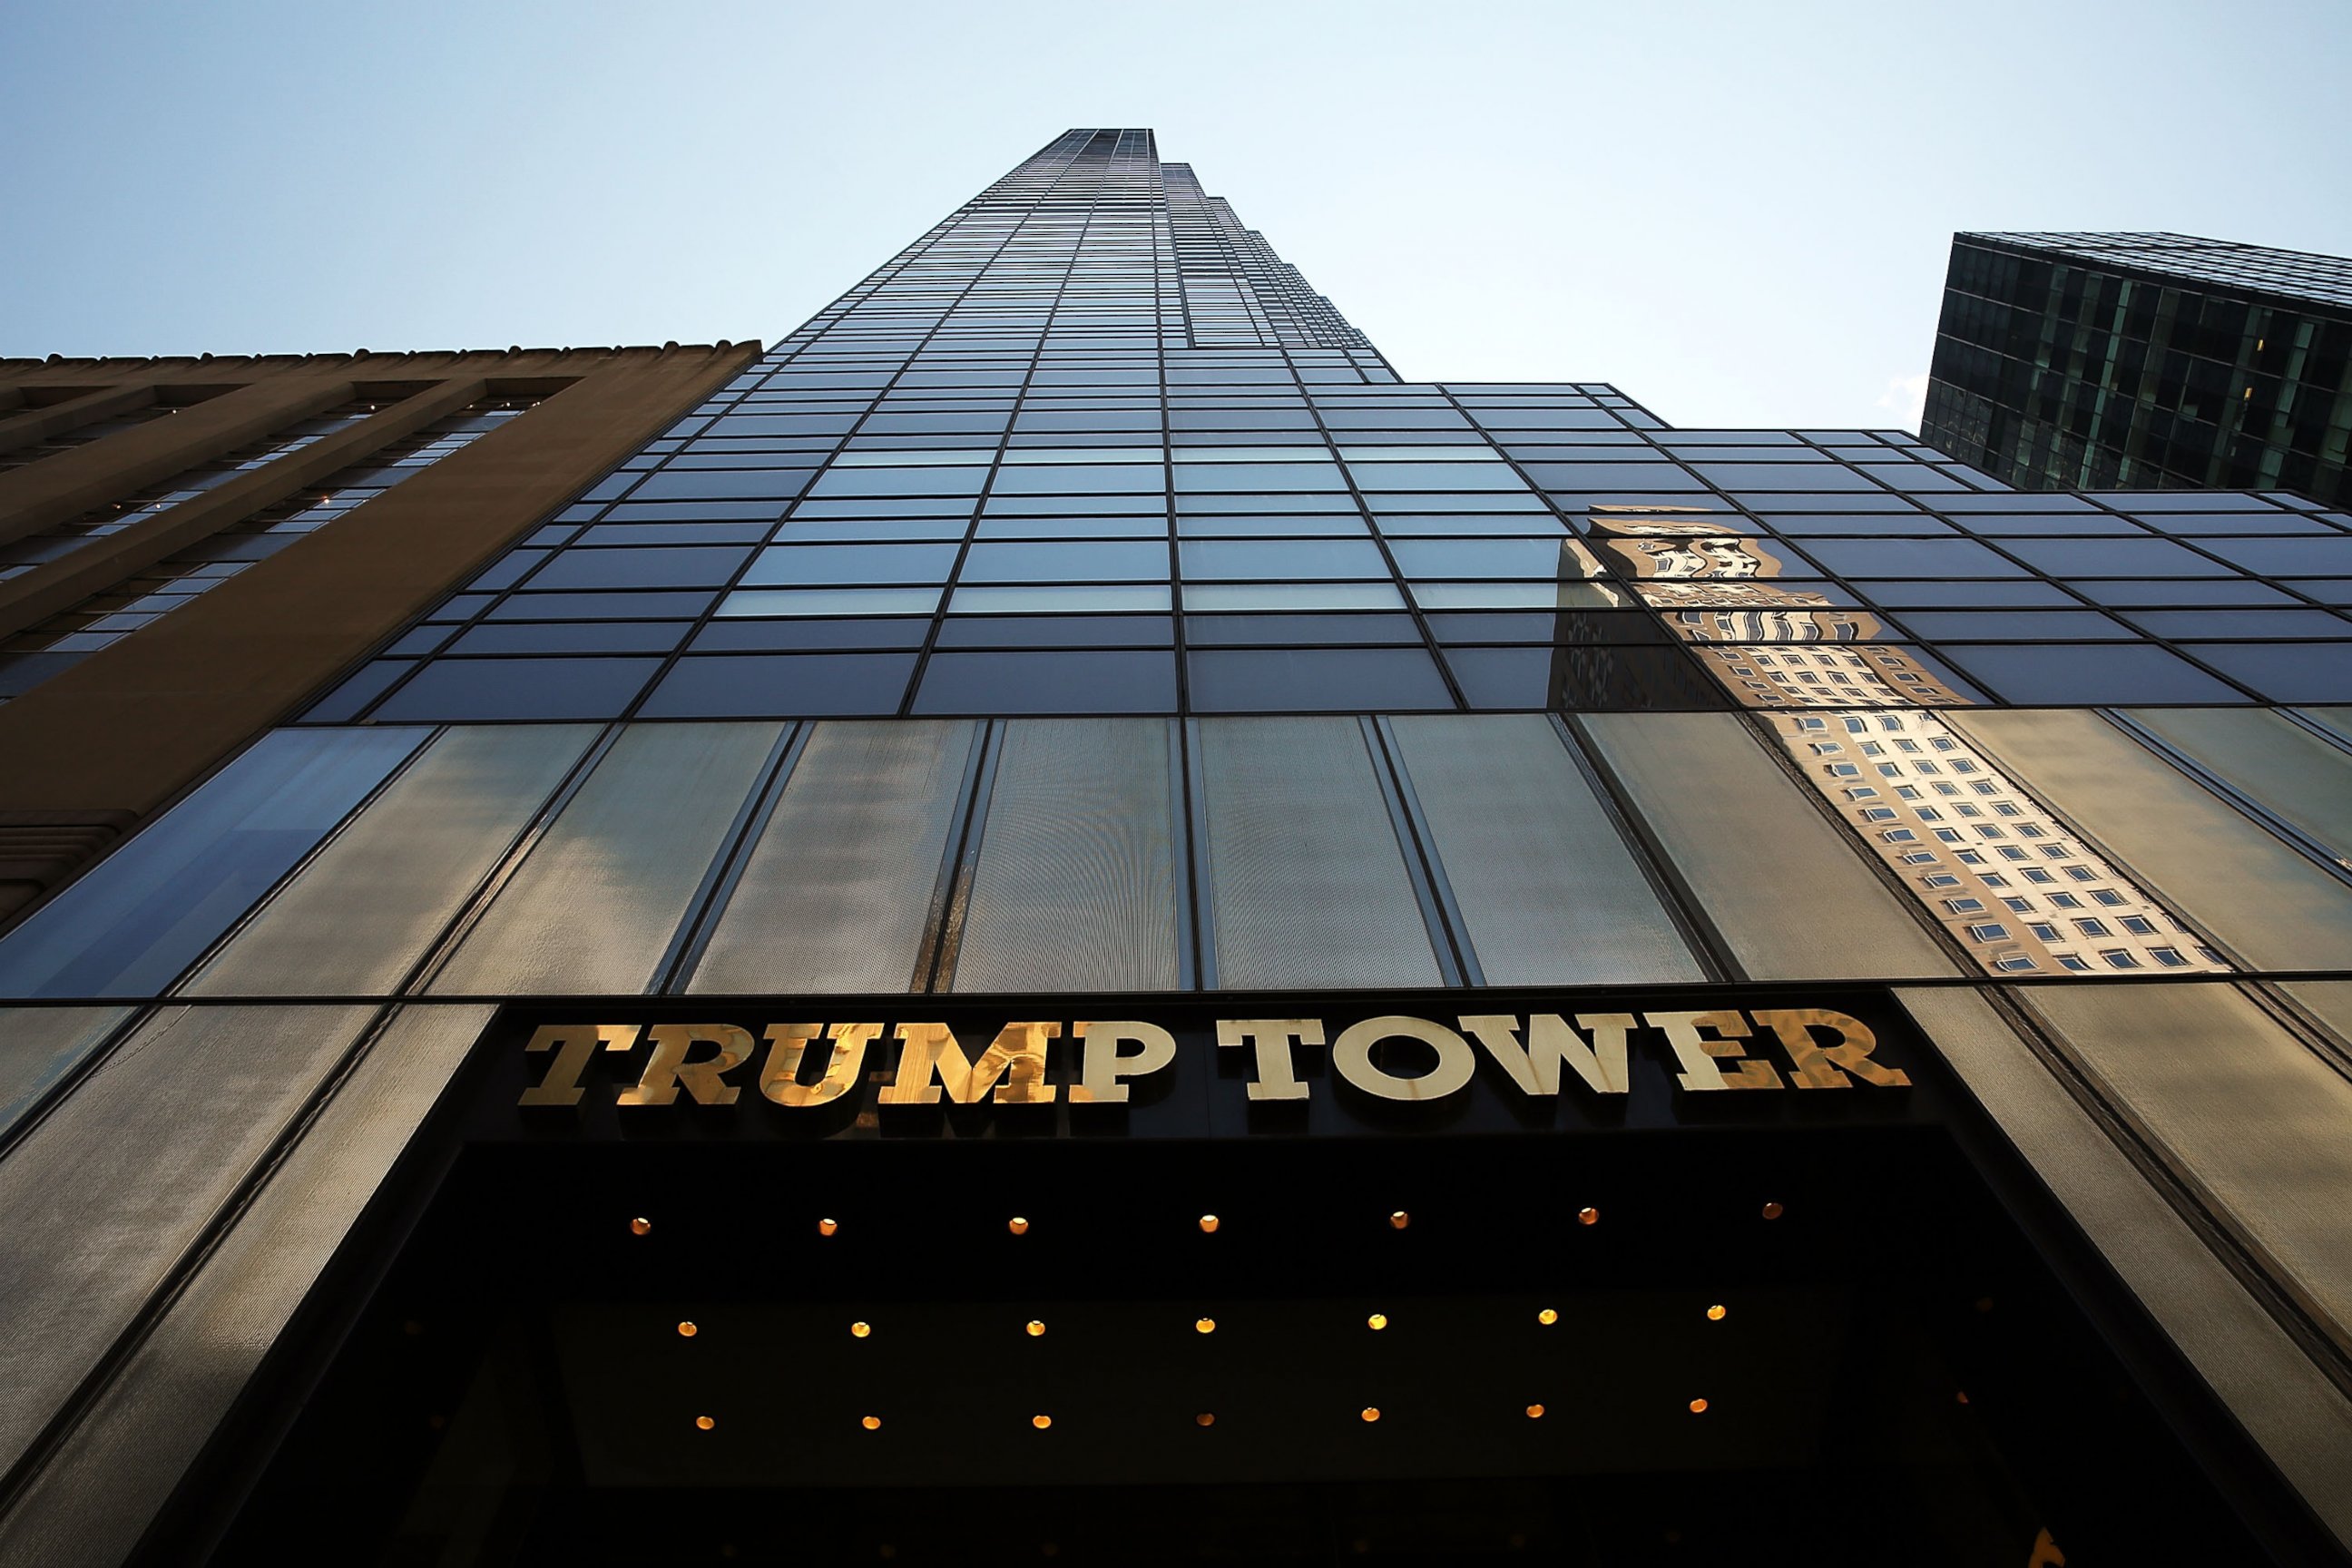 PHOTO: The Trump Tower building is viewed on 5th Avenue, July 22, 2015, in New York City.